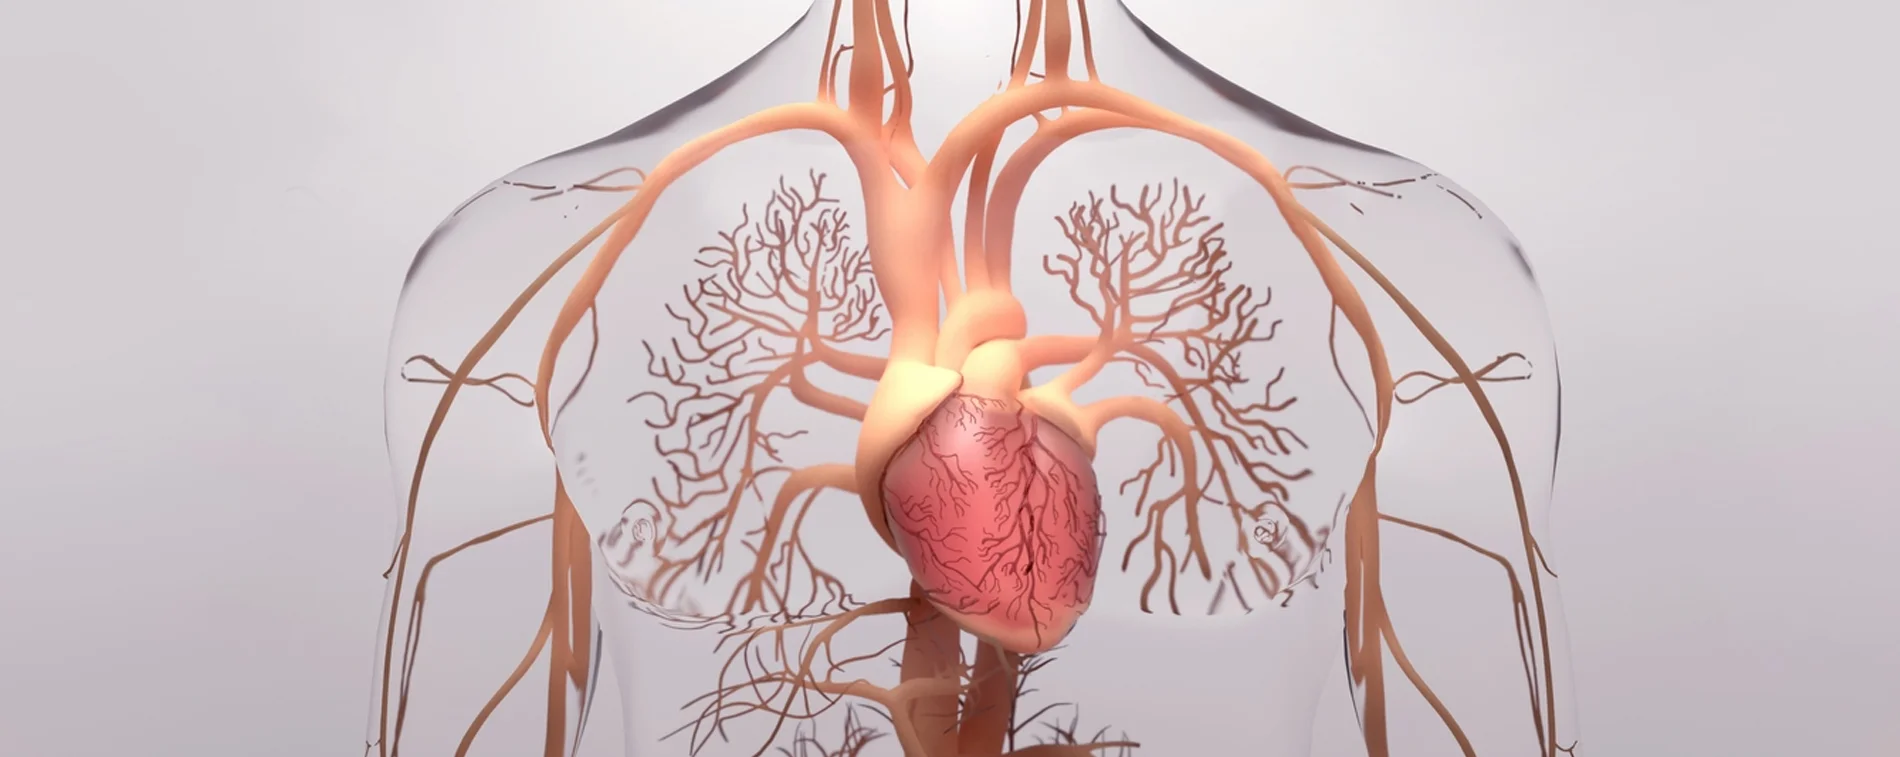 Medical Errors in Healthcare Let’s talk about interstitial lung disease